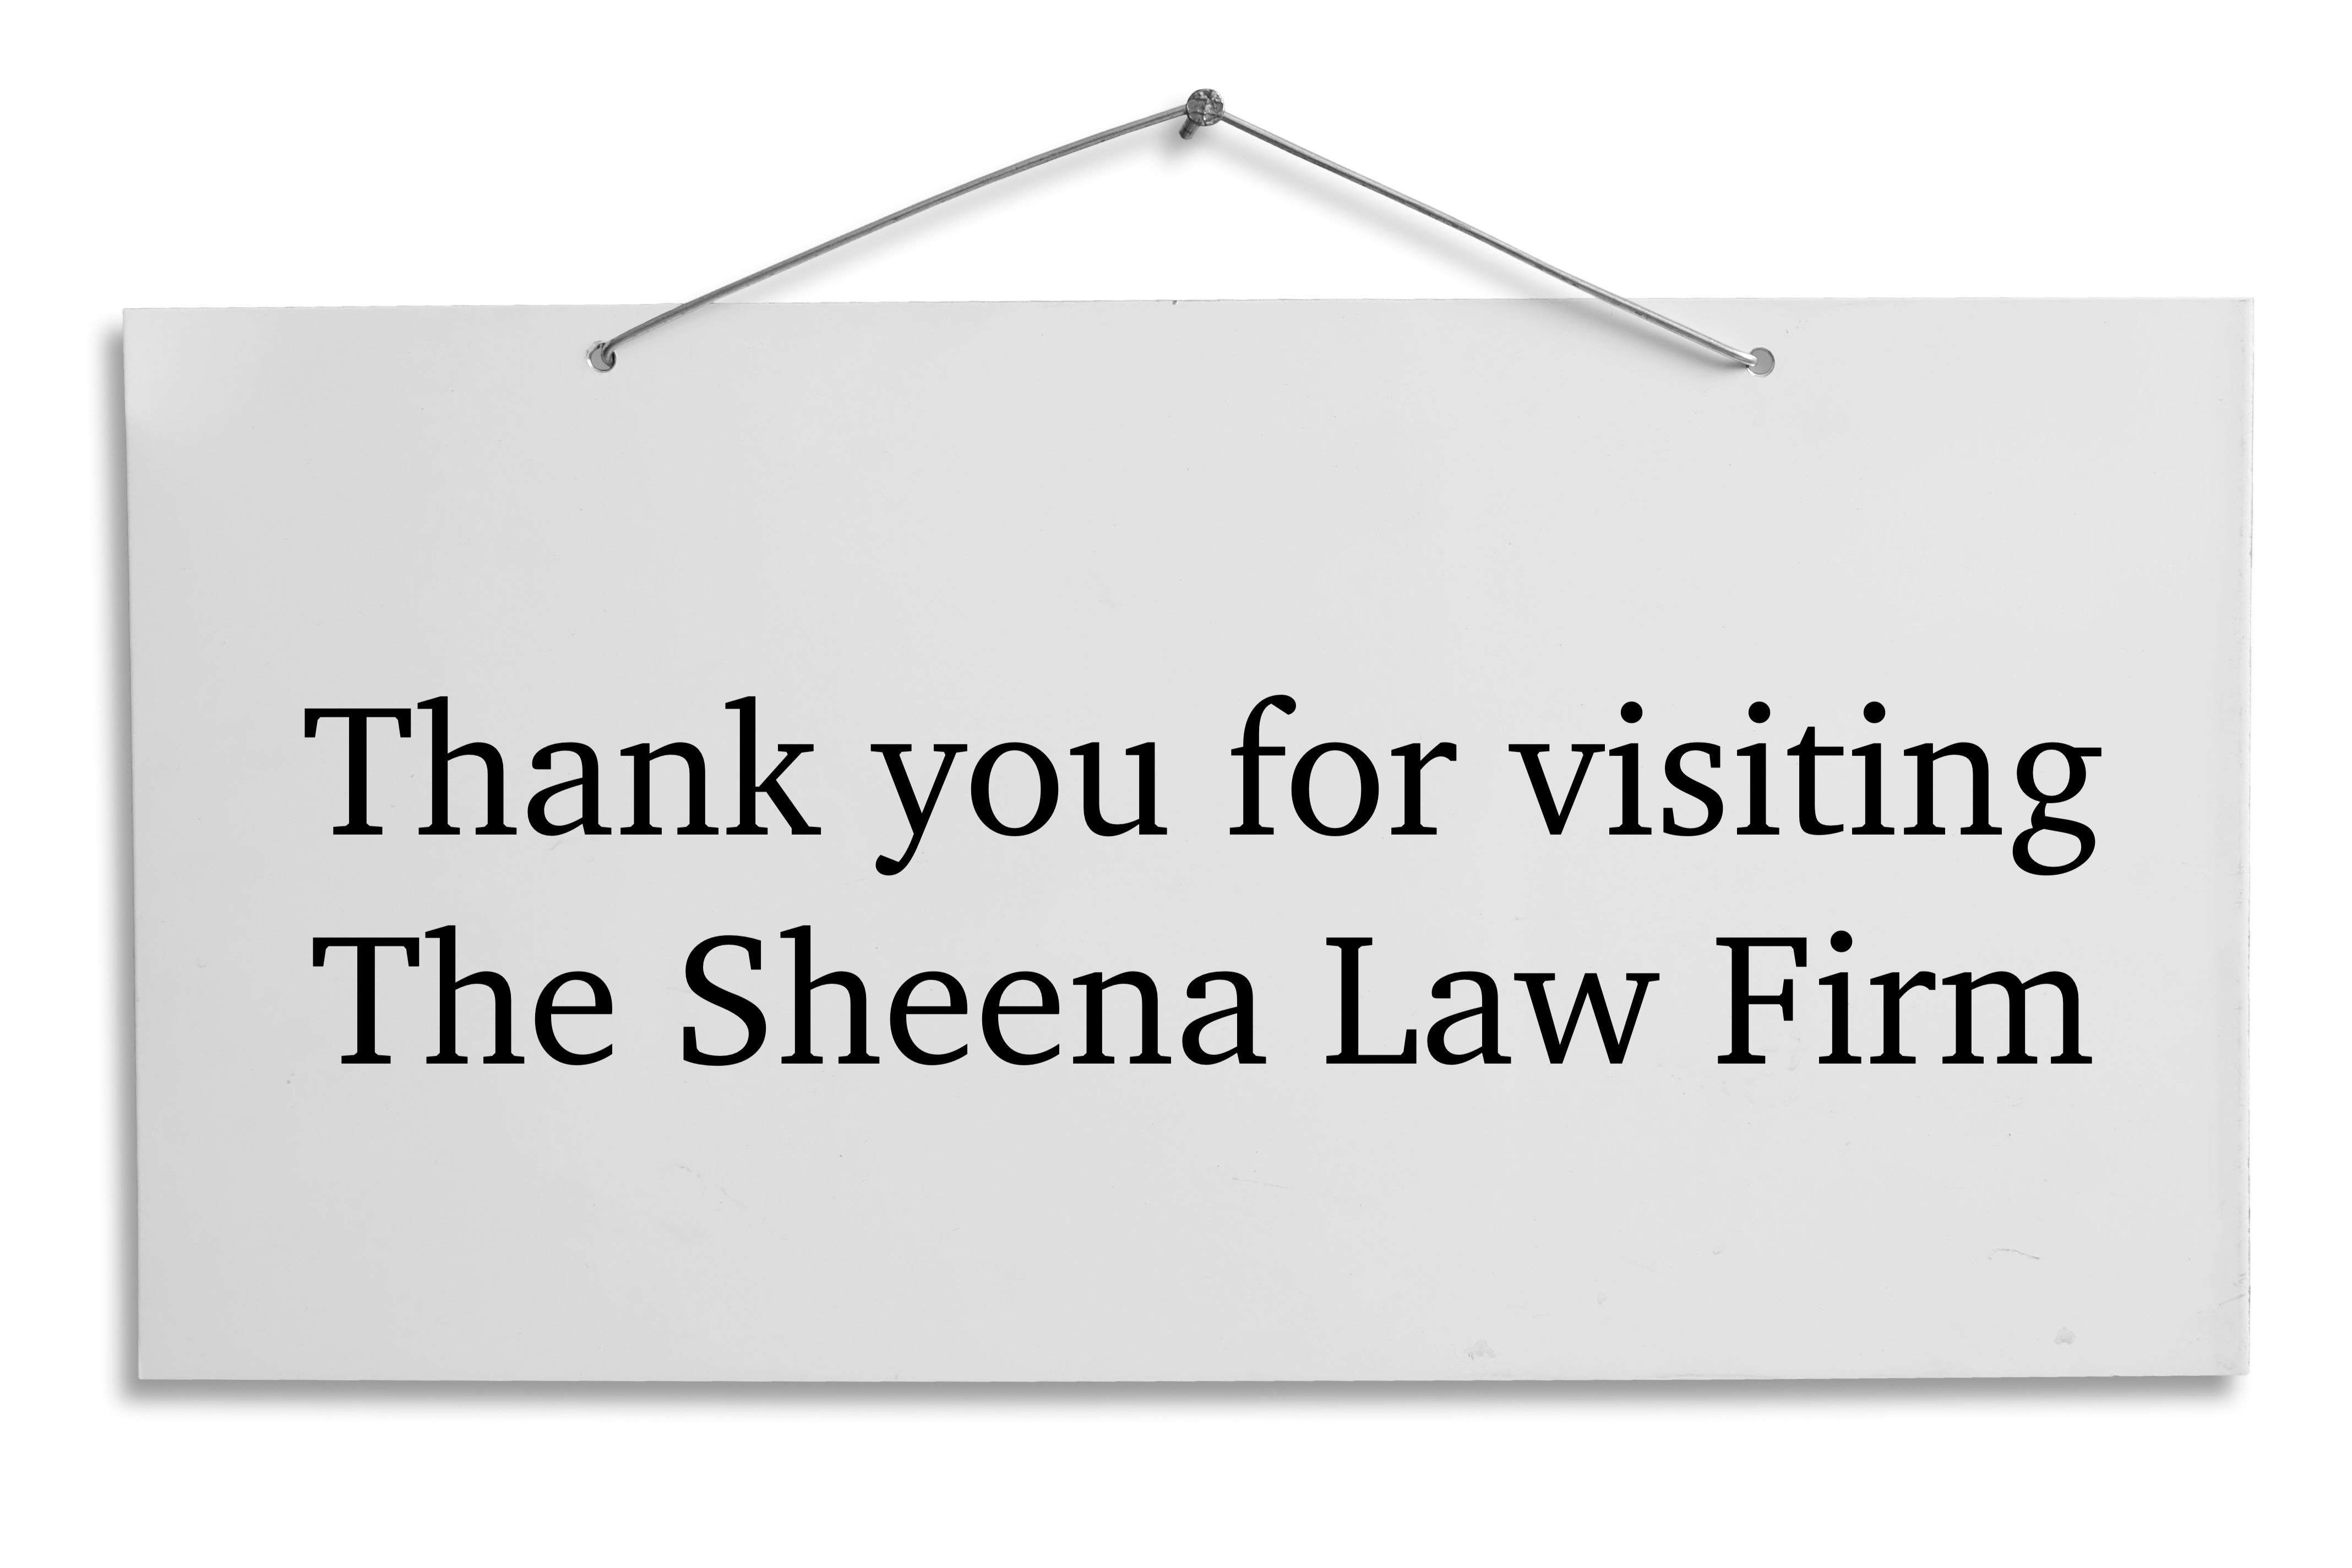 Thank you for visiting The Sheena Law Firm